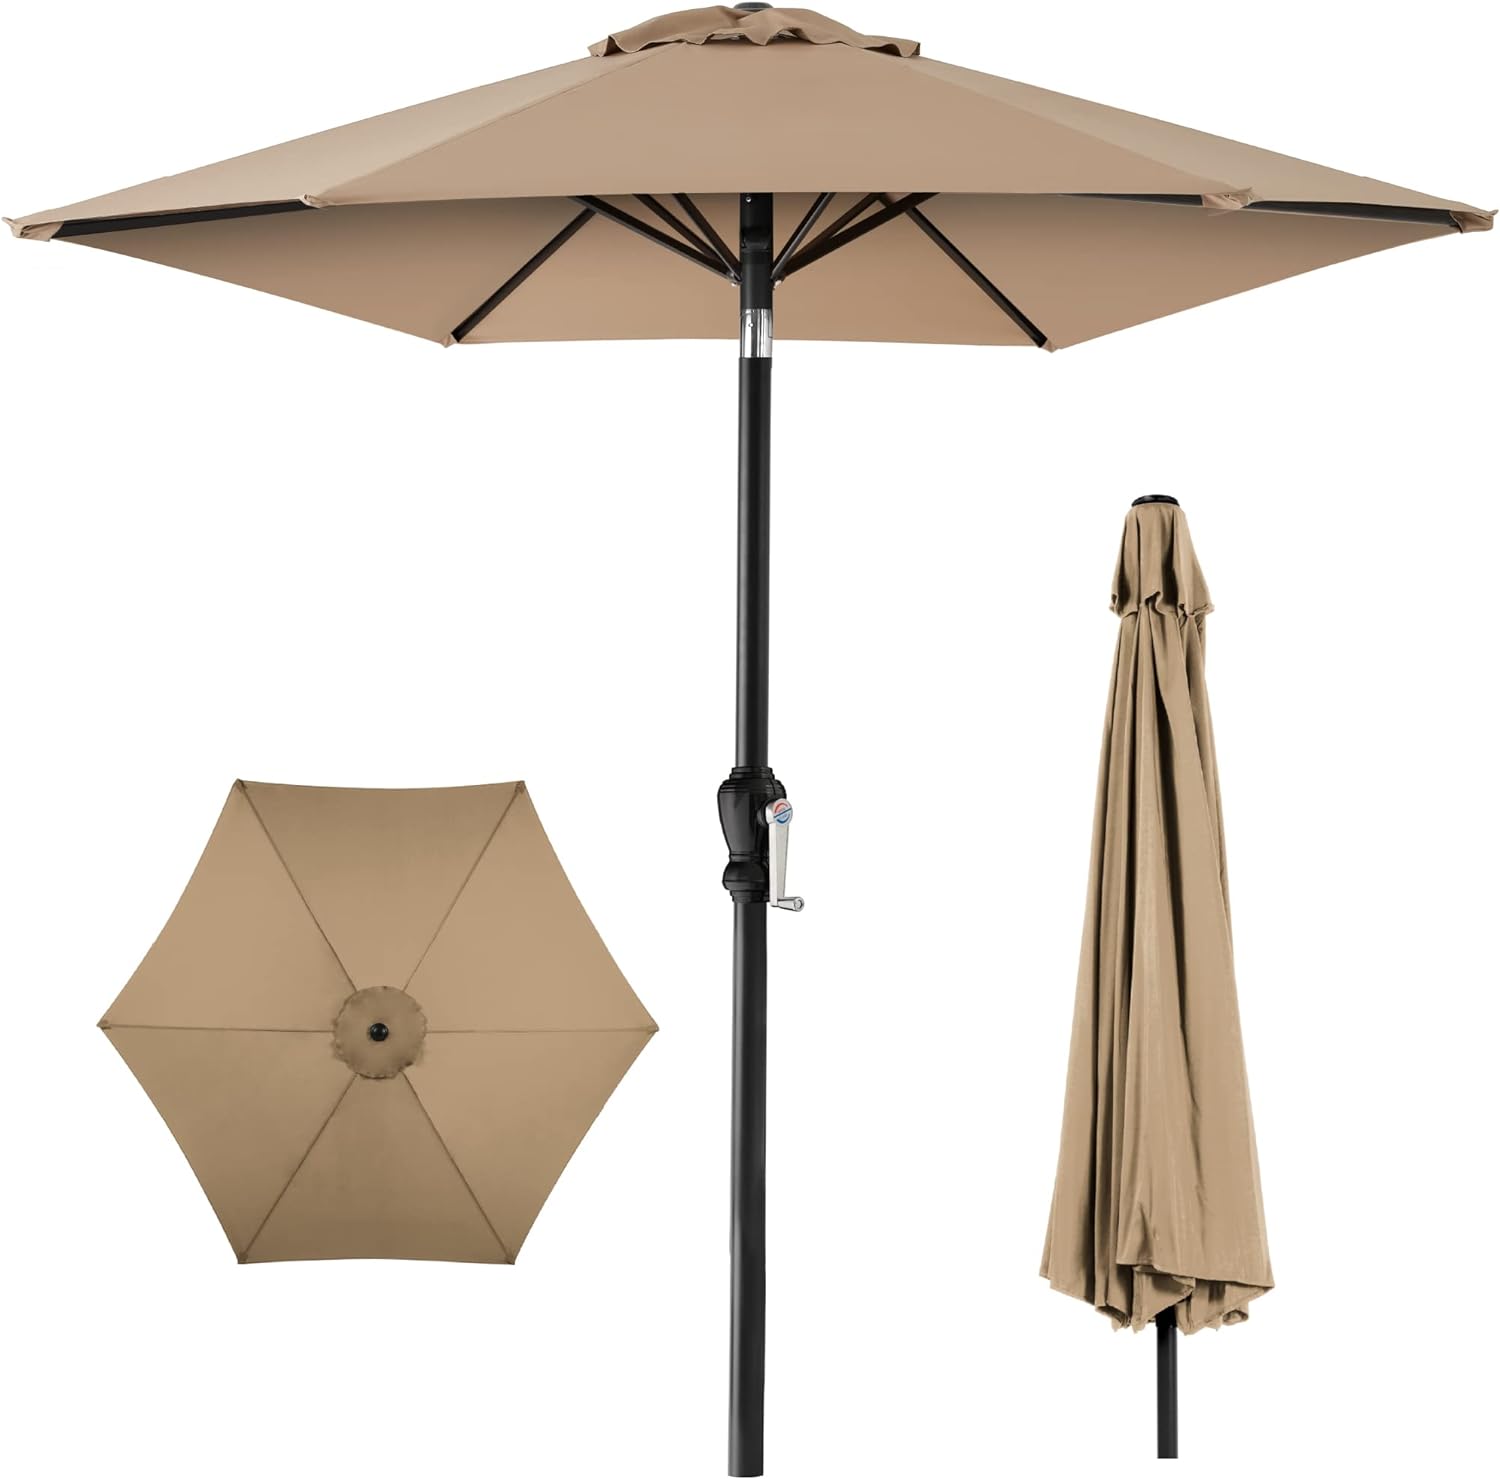 Best Choice Products 10ft Outdoor Steel Polyester Market Patio Umbrella w/Crank, Easy Push Button, Tilt, Table Compatible - Tan